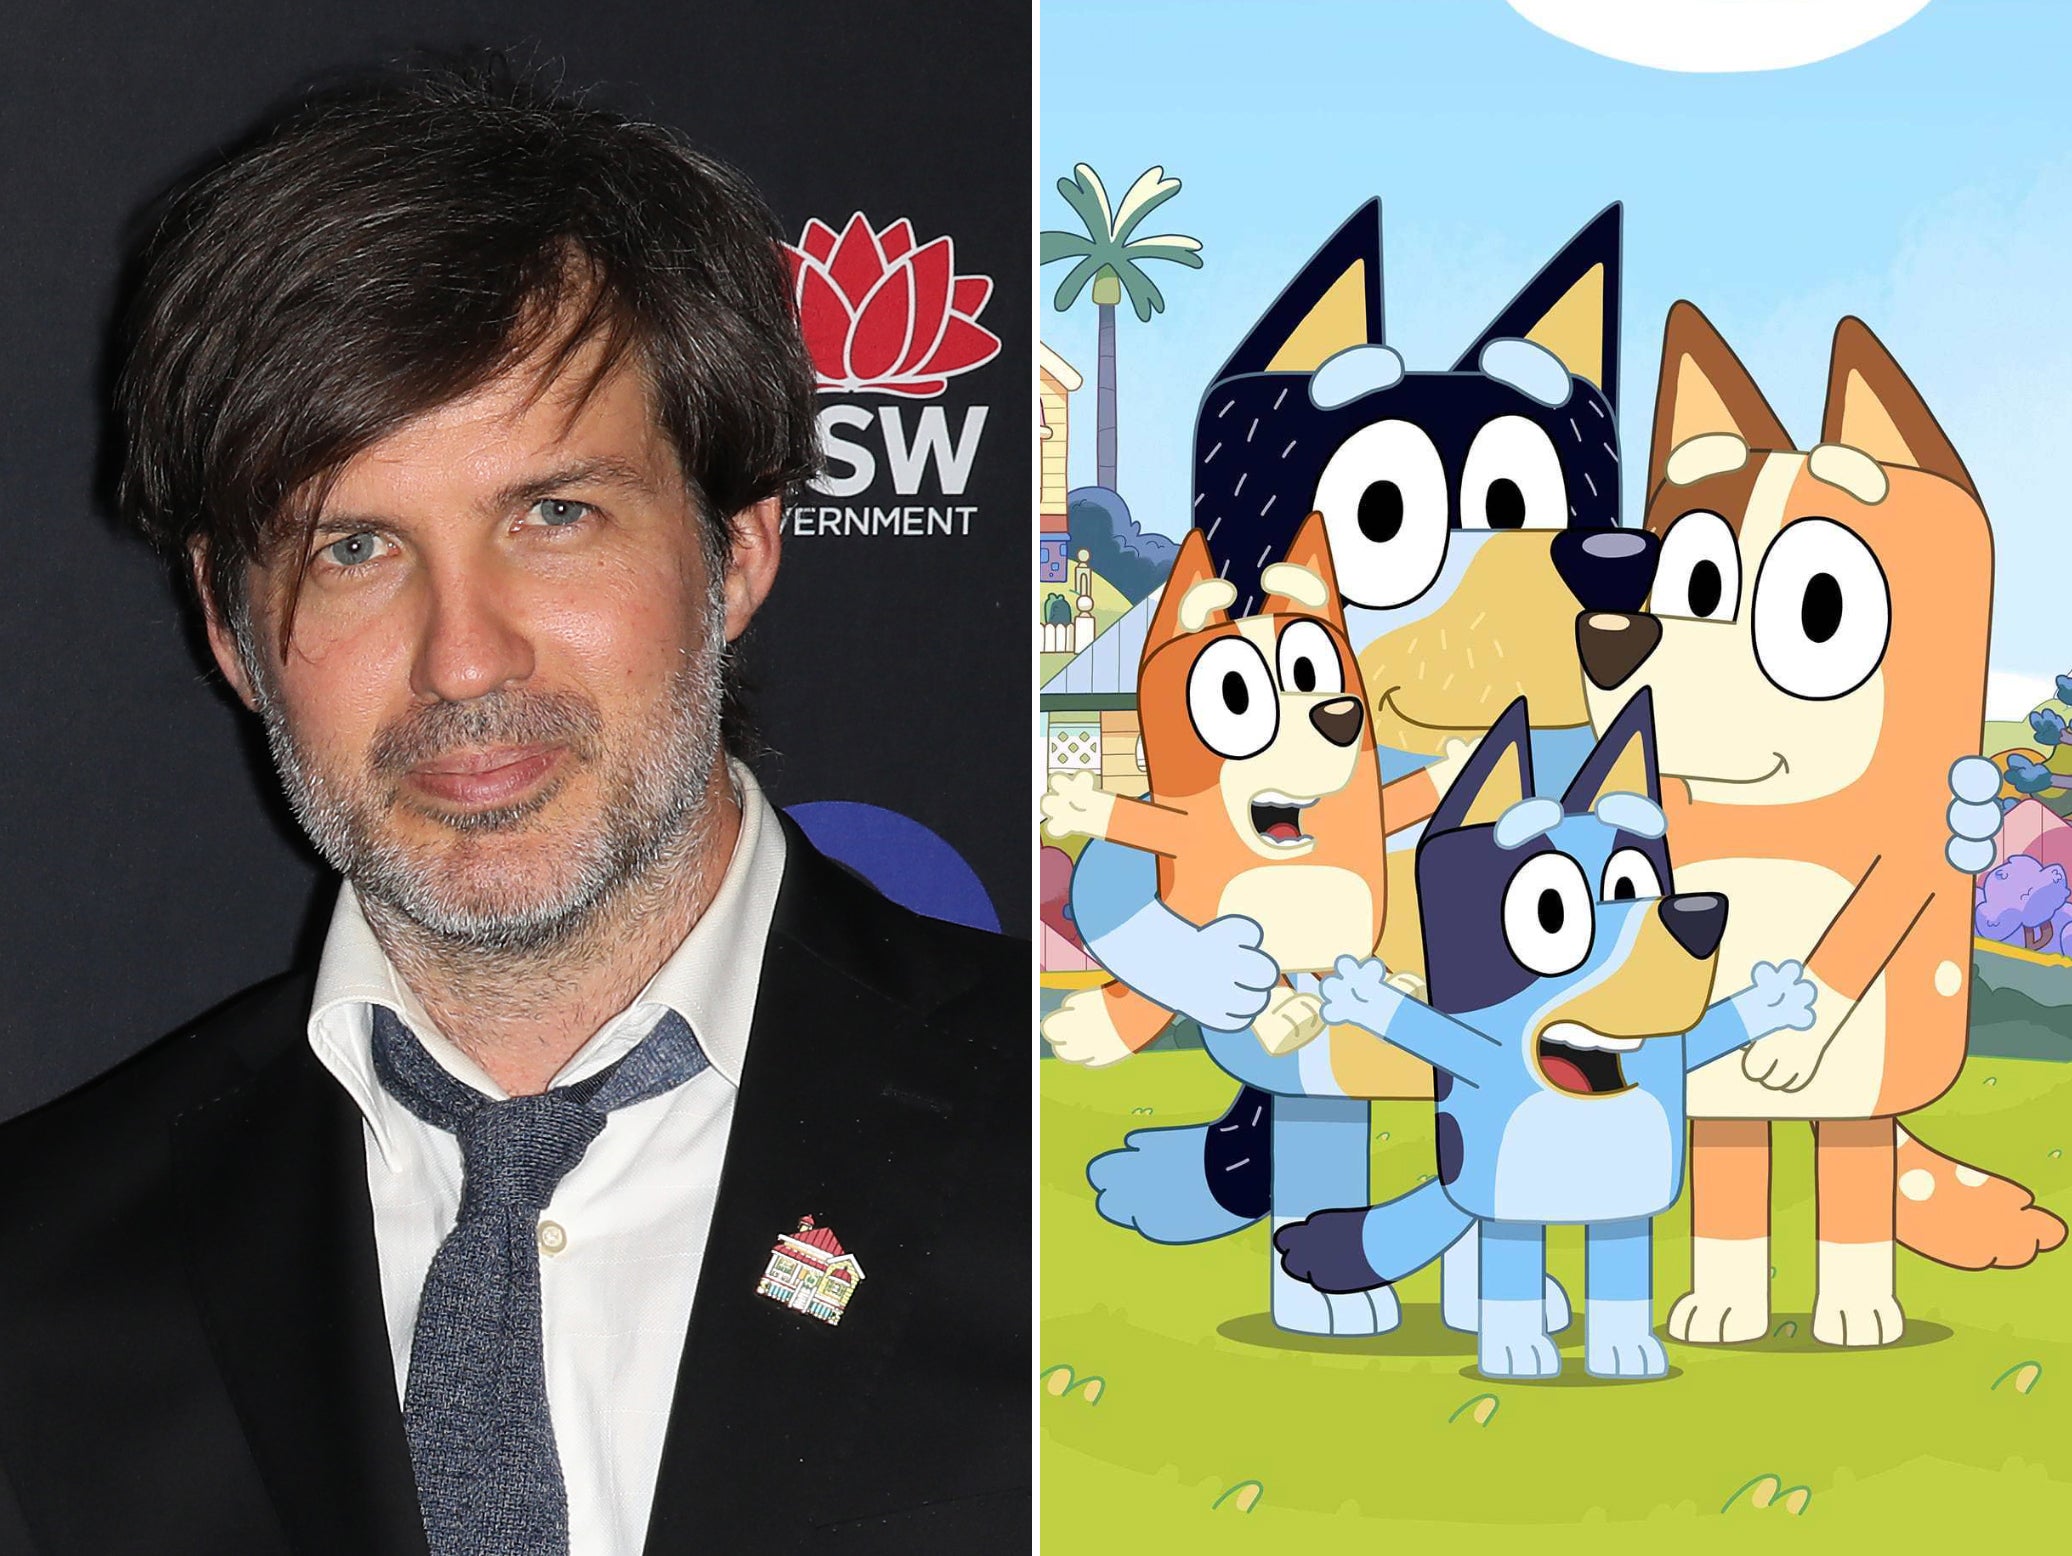 Bluey creator Joe Brumm modelled the cartoon phenomenon on his own parenting experience but looks forward to returning to adult animation